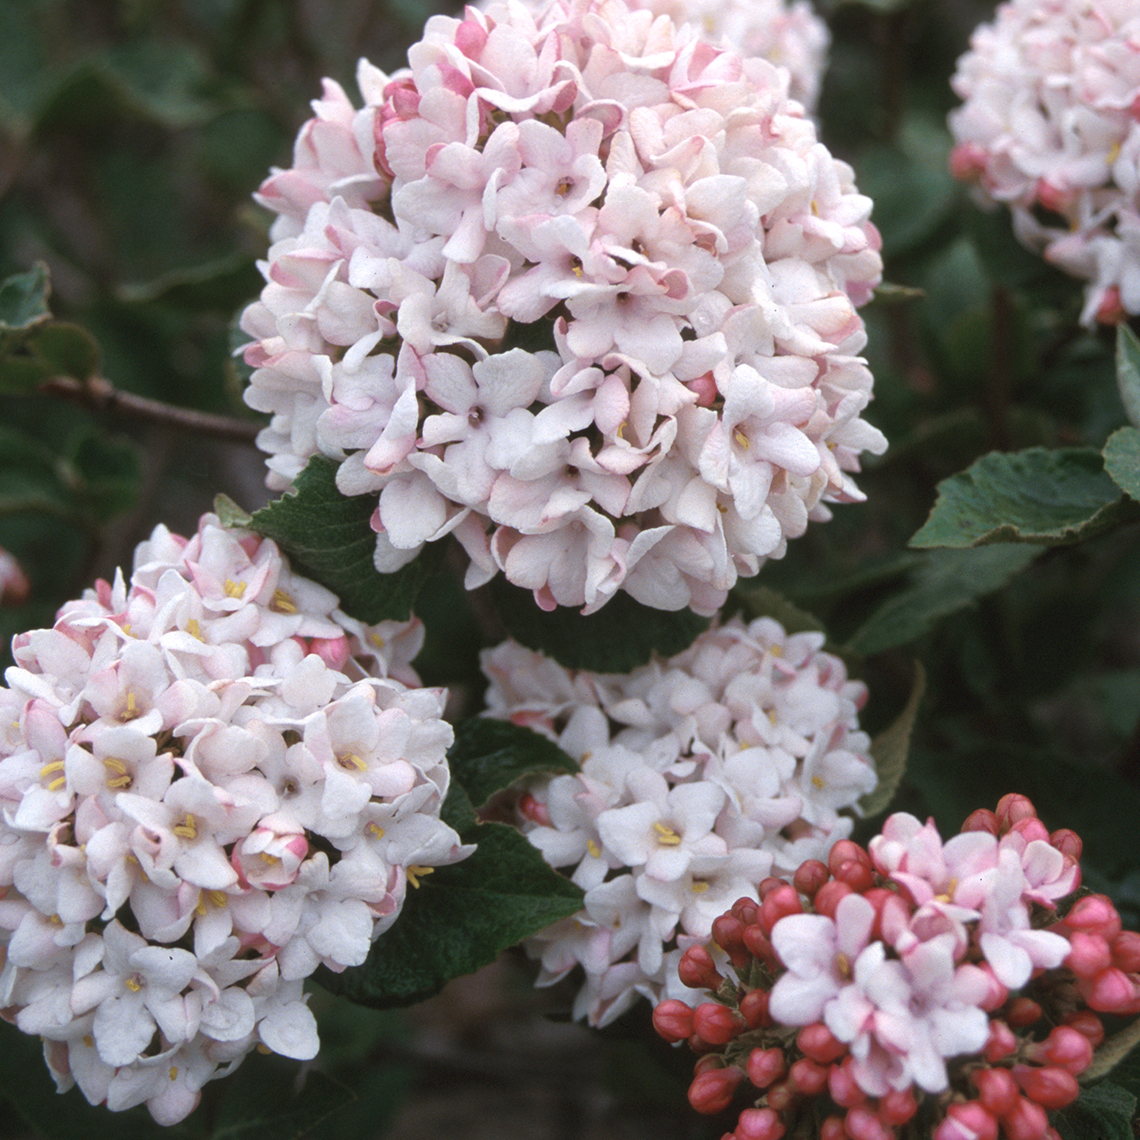 Very round white and pink flower clusters of Cayuga viburnum